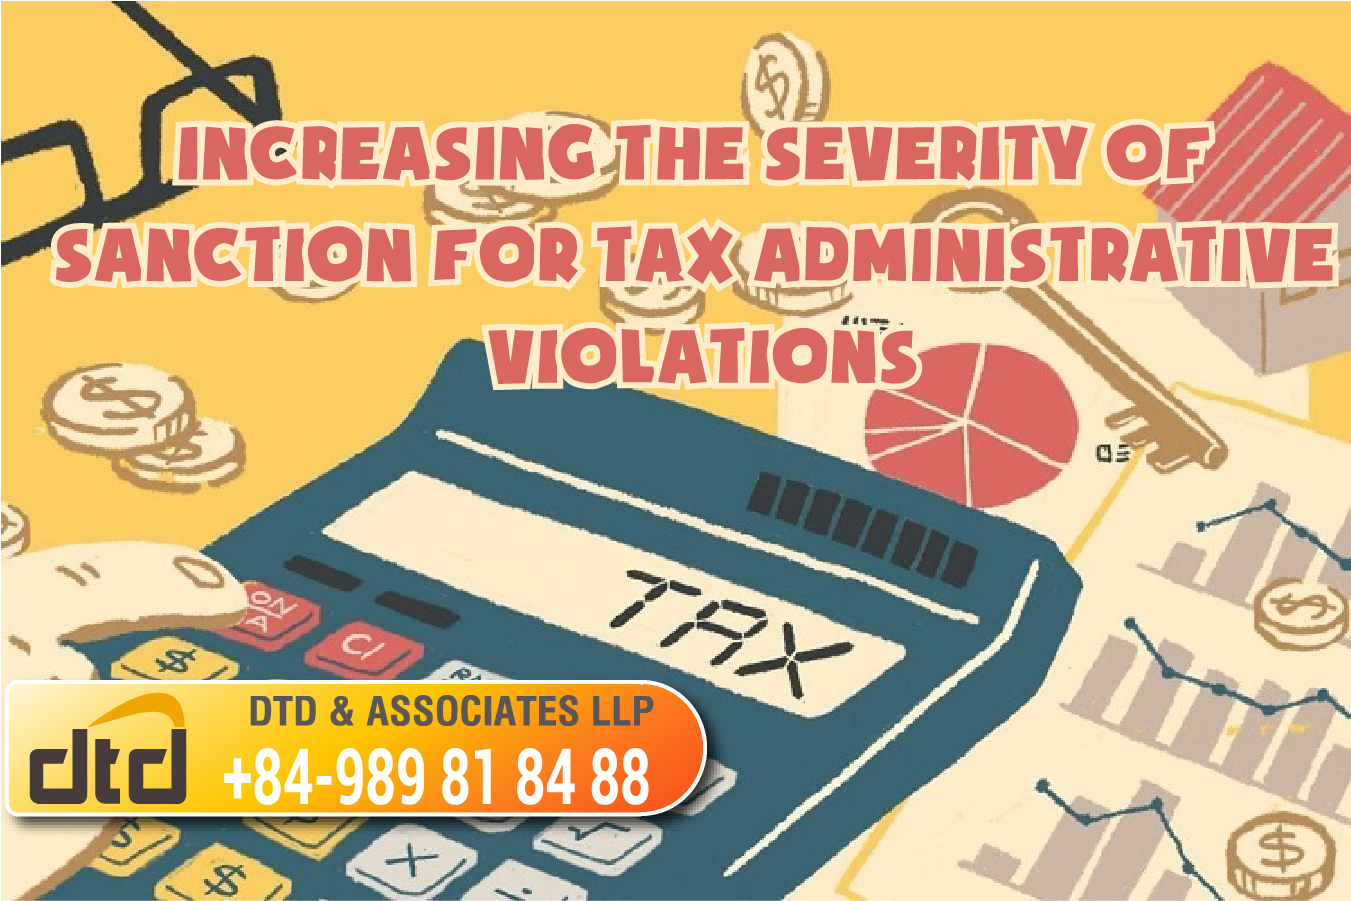 INCREASING THE SEVERITY OF SANCTION FOR TAX ADMINISTRATIVE VIOLATIONS